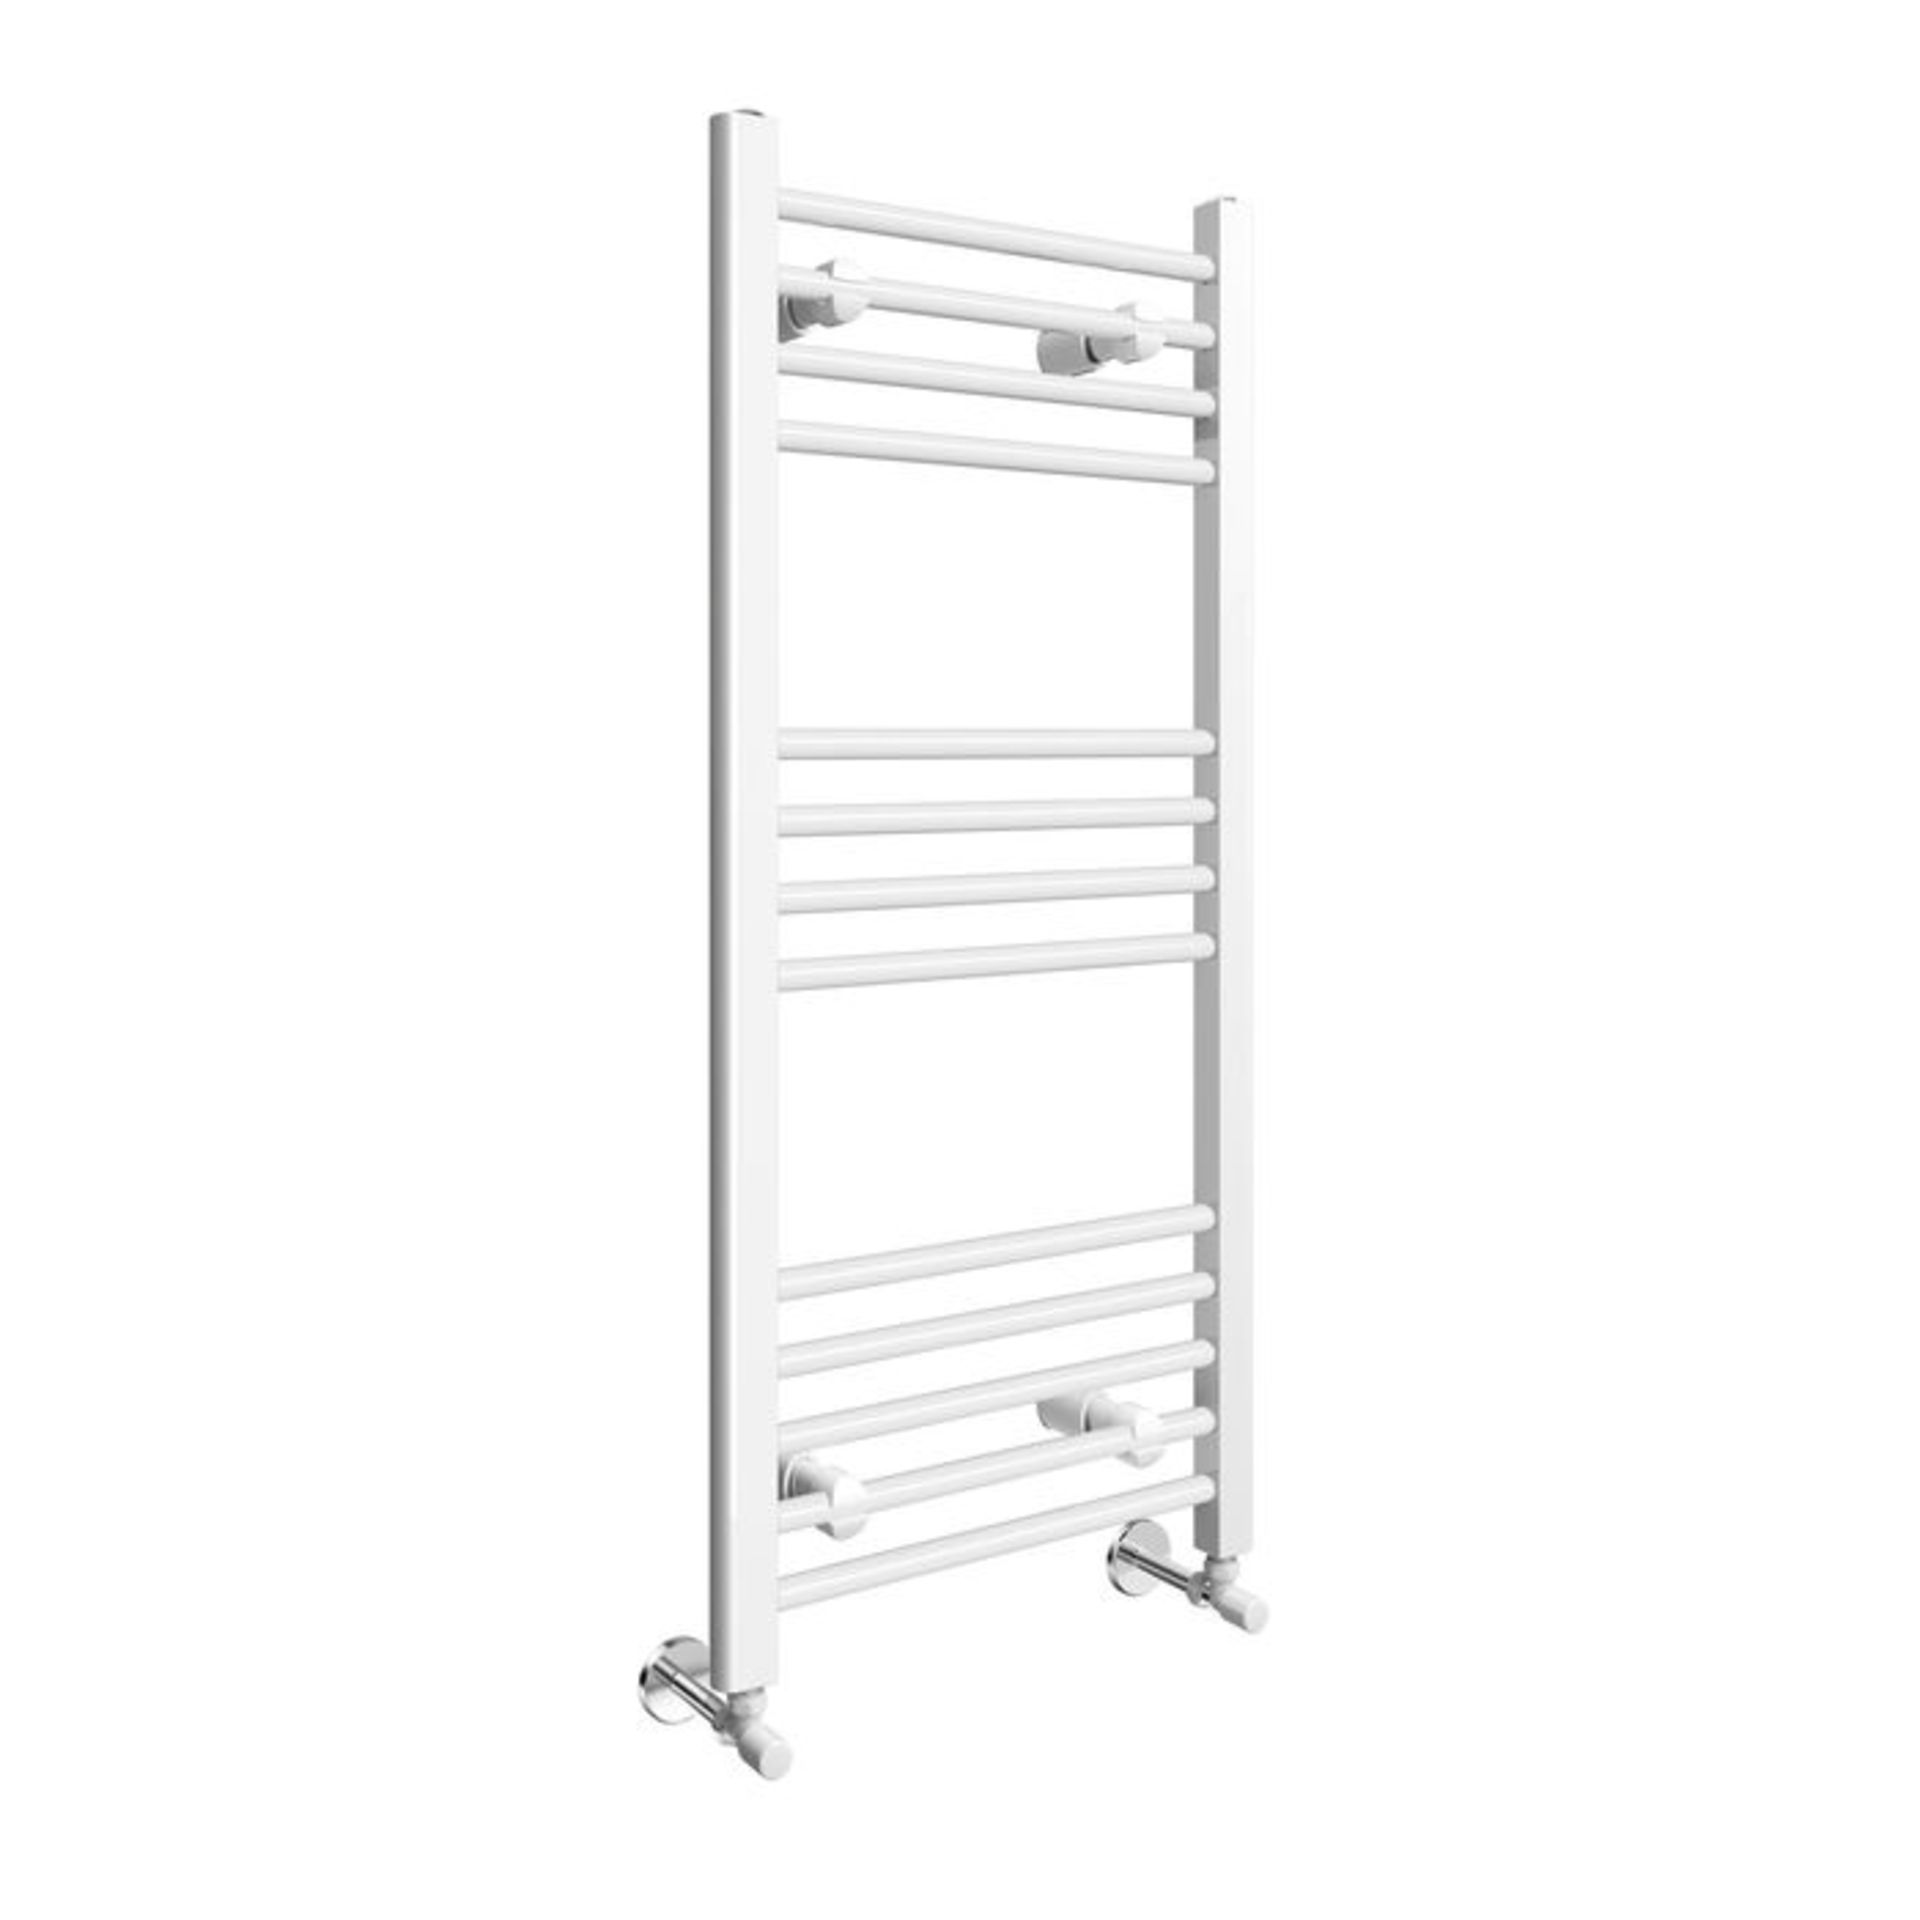 (TT120) 800x450mm White Straight Rail Ladder Towel Radiator. RRP £249.99. Made from low carbo... - Image 3 of 3